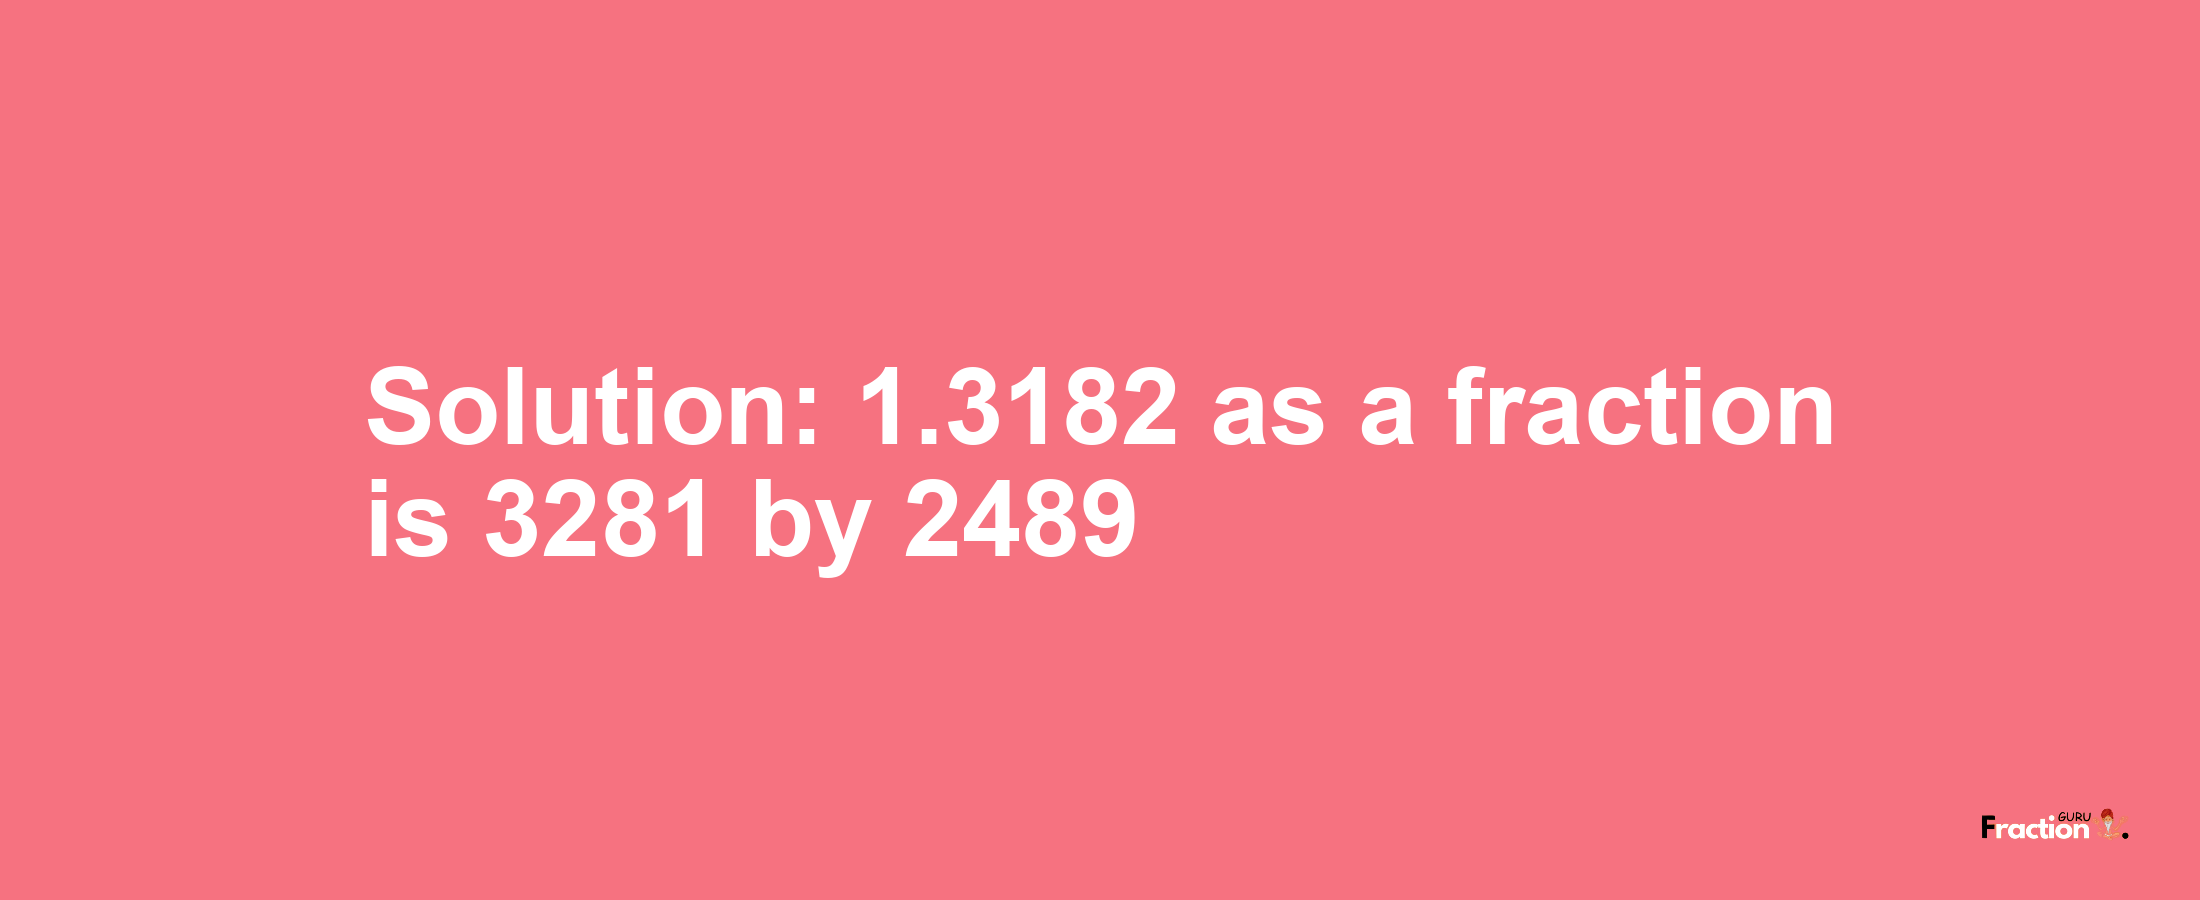 Solution:1.3182 as a fraction is 3281/2489